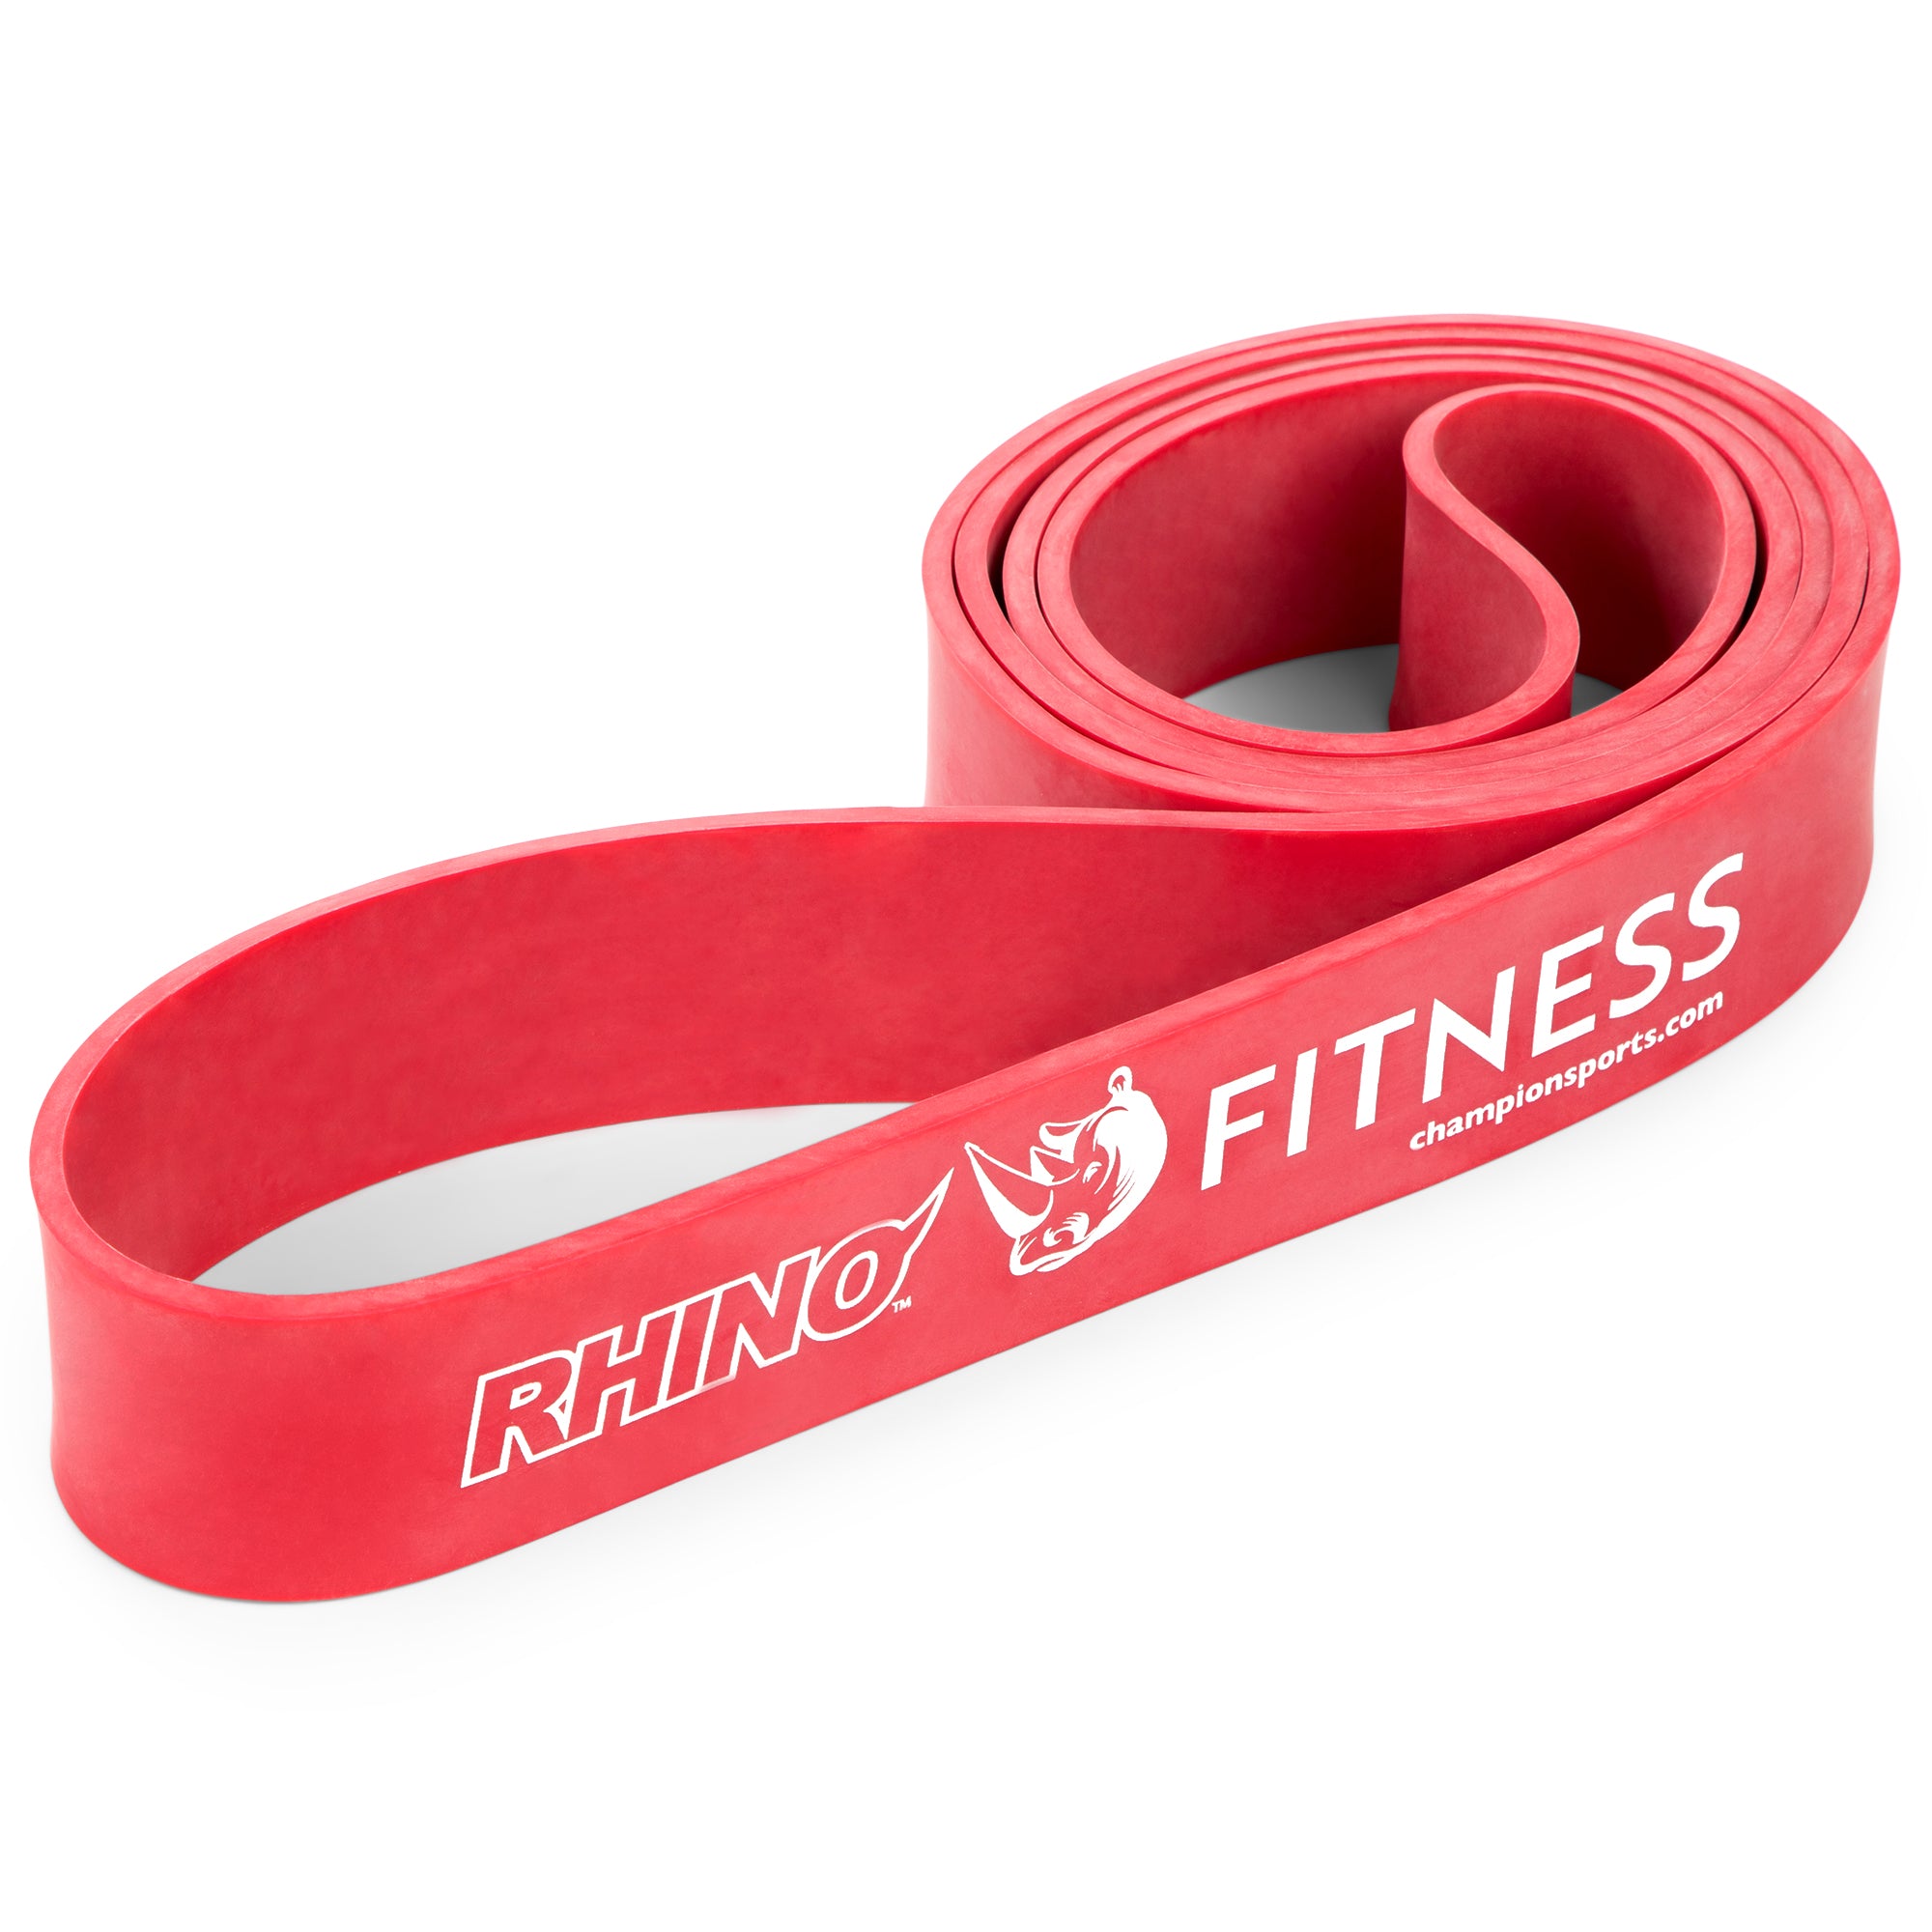 RHINO Fitness® Stretch Resistance-Training Band Series Heavy, 50-90 lbs, Red RHINO Fitness fitness